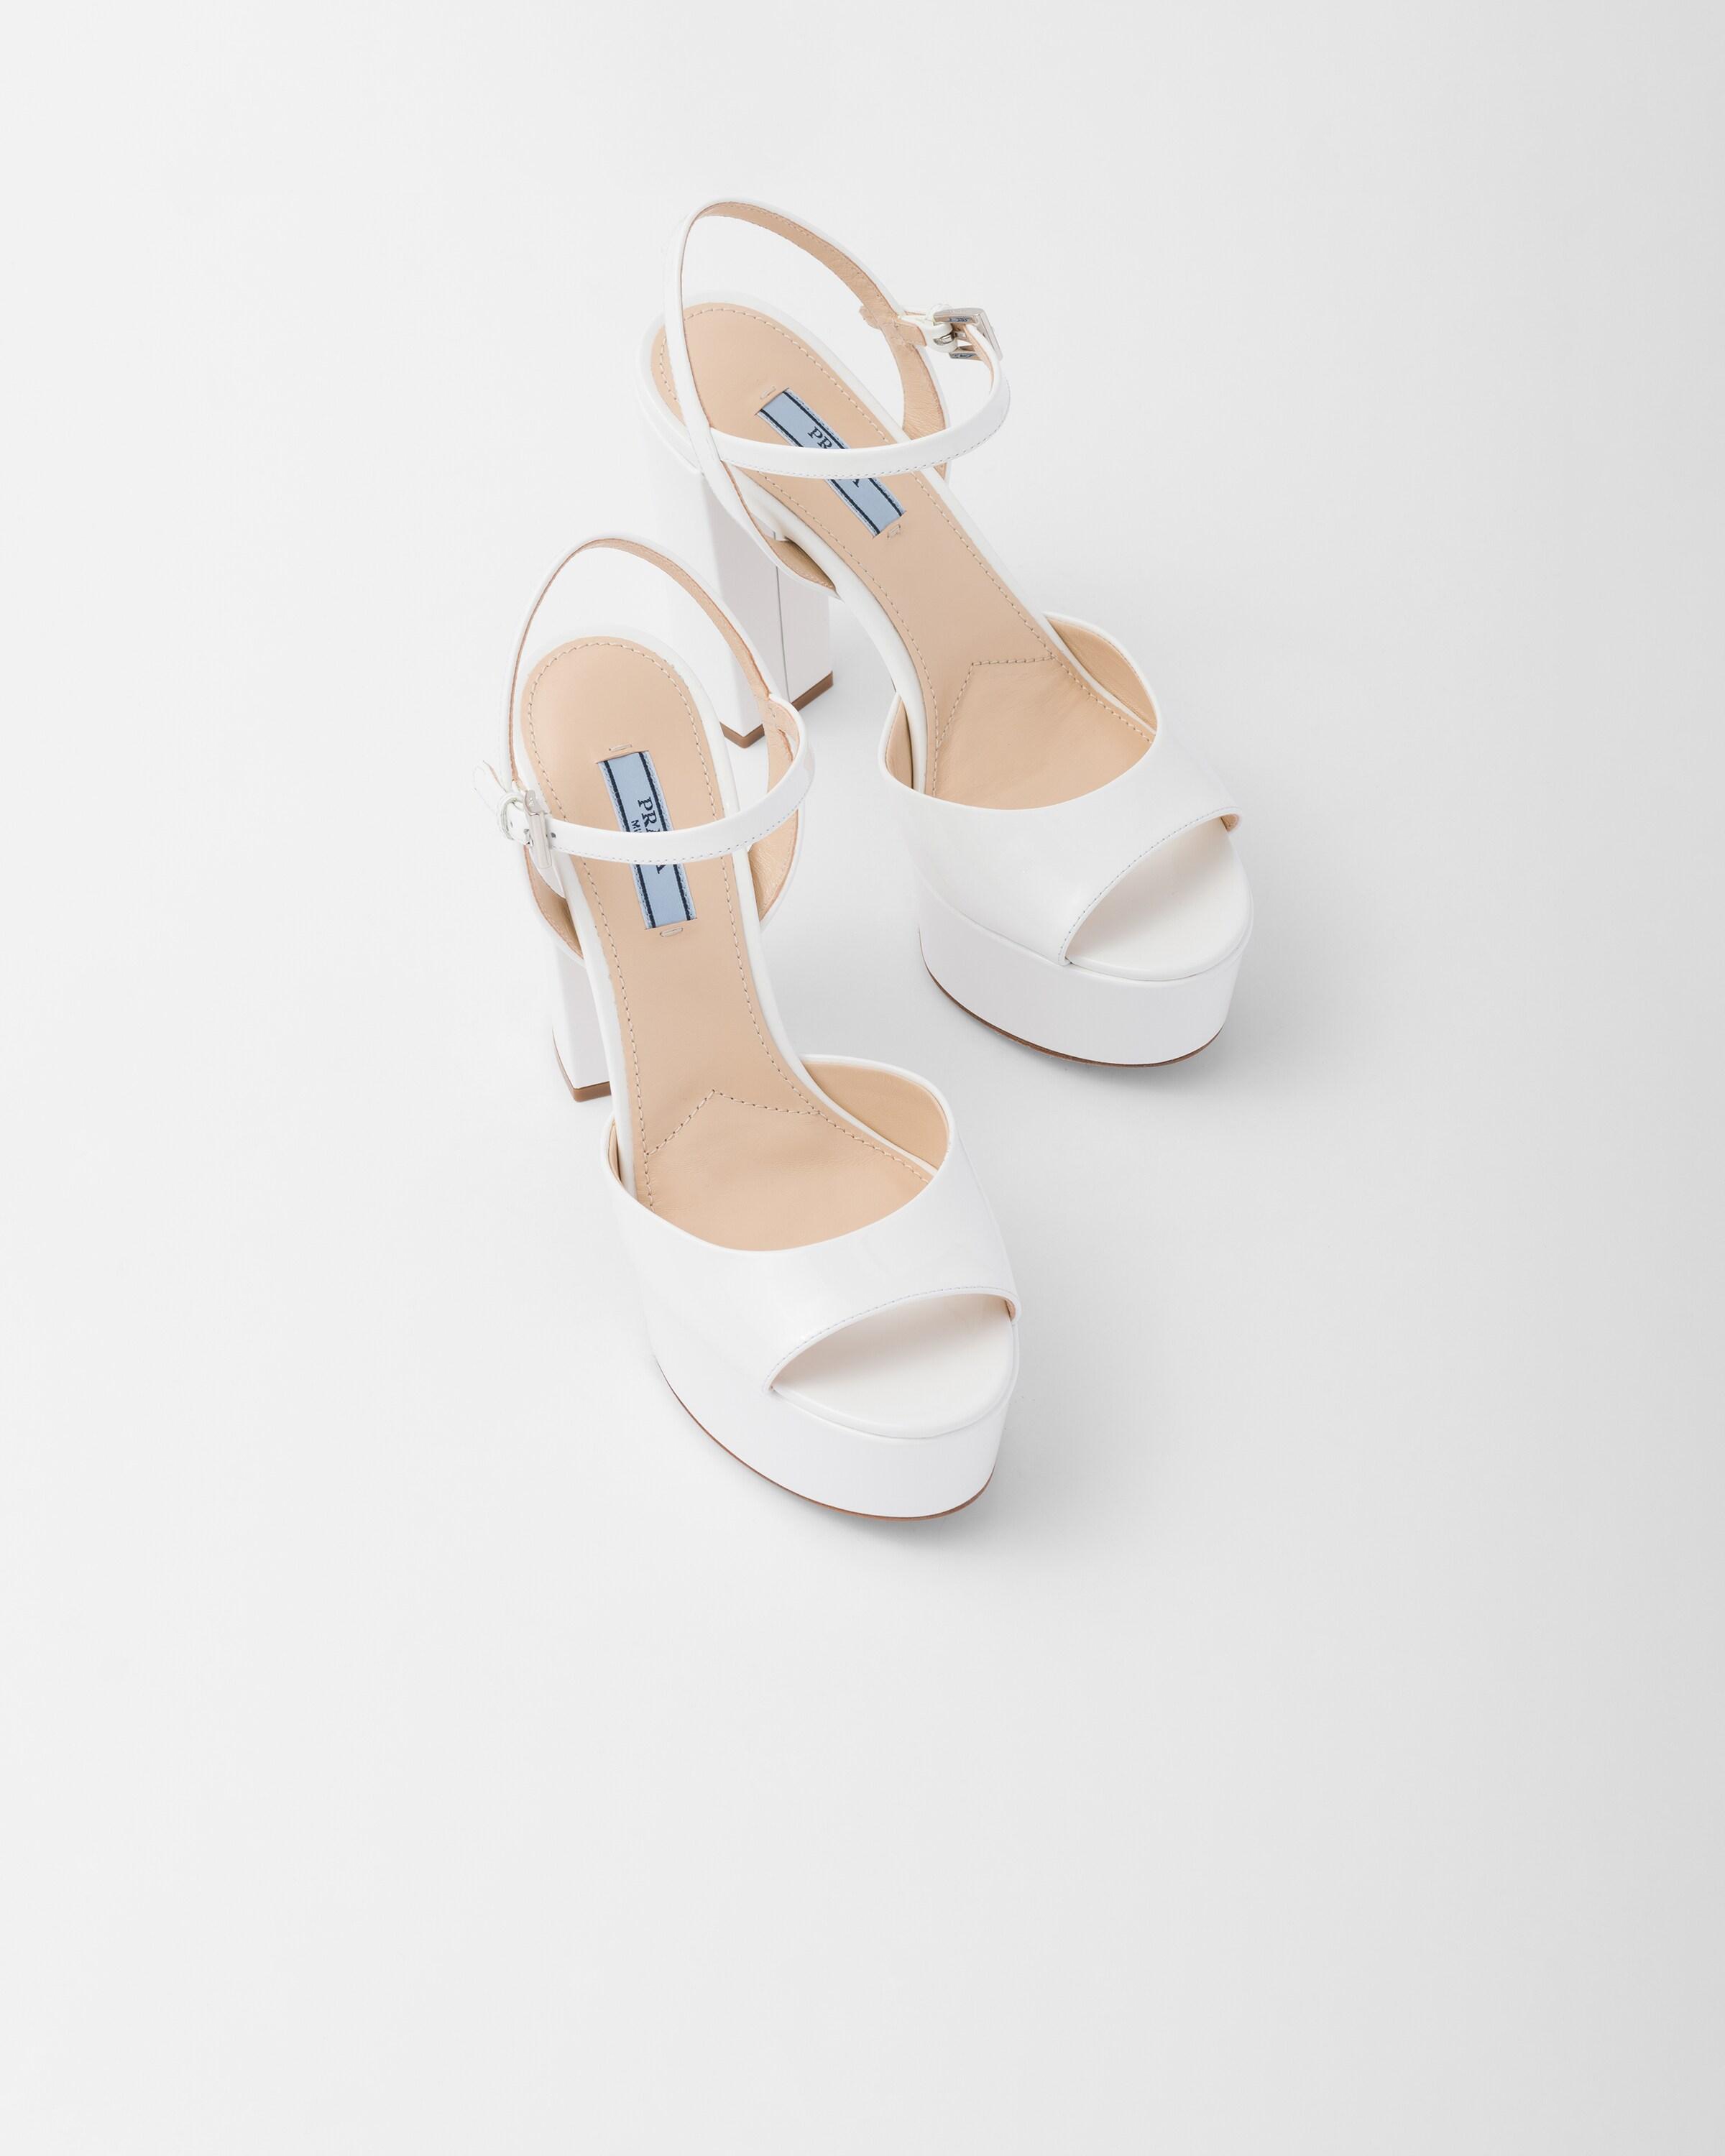 Prada High-heeled Patent Leather Sandals in White | Lyst